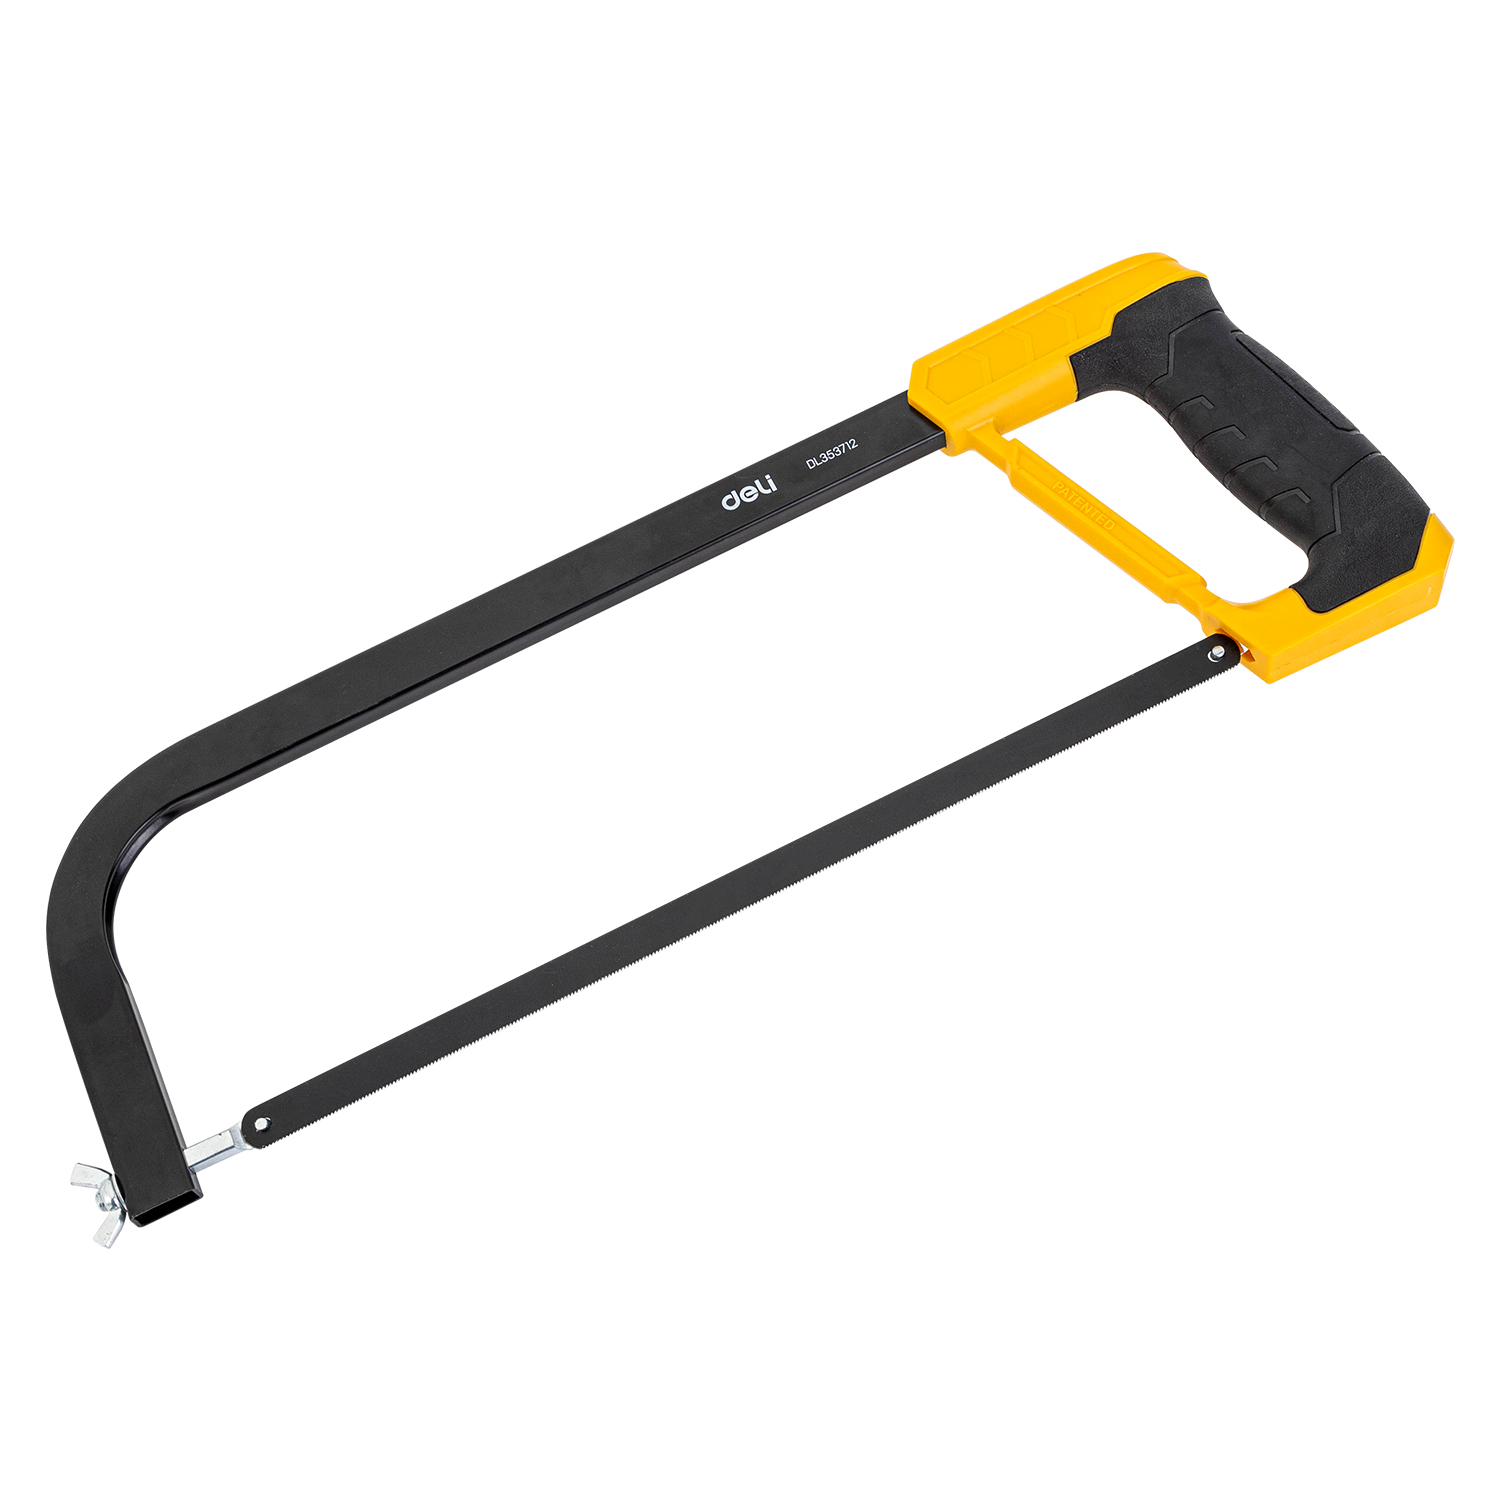 Hacksaw with Coated Handle 300mm/12"